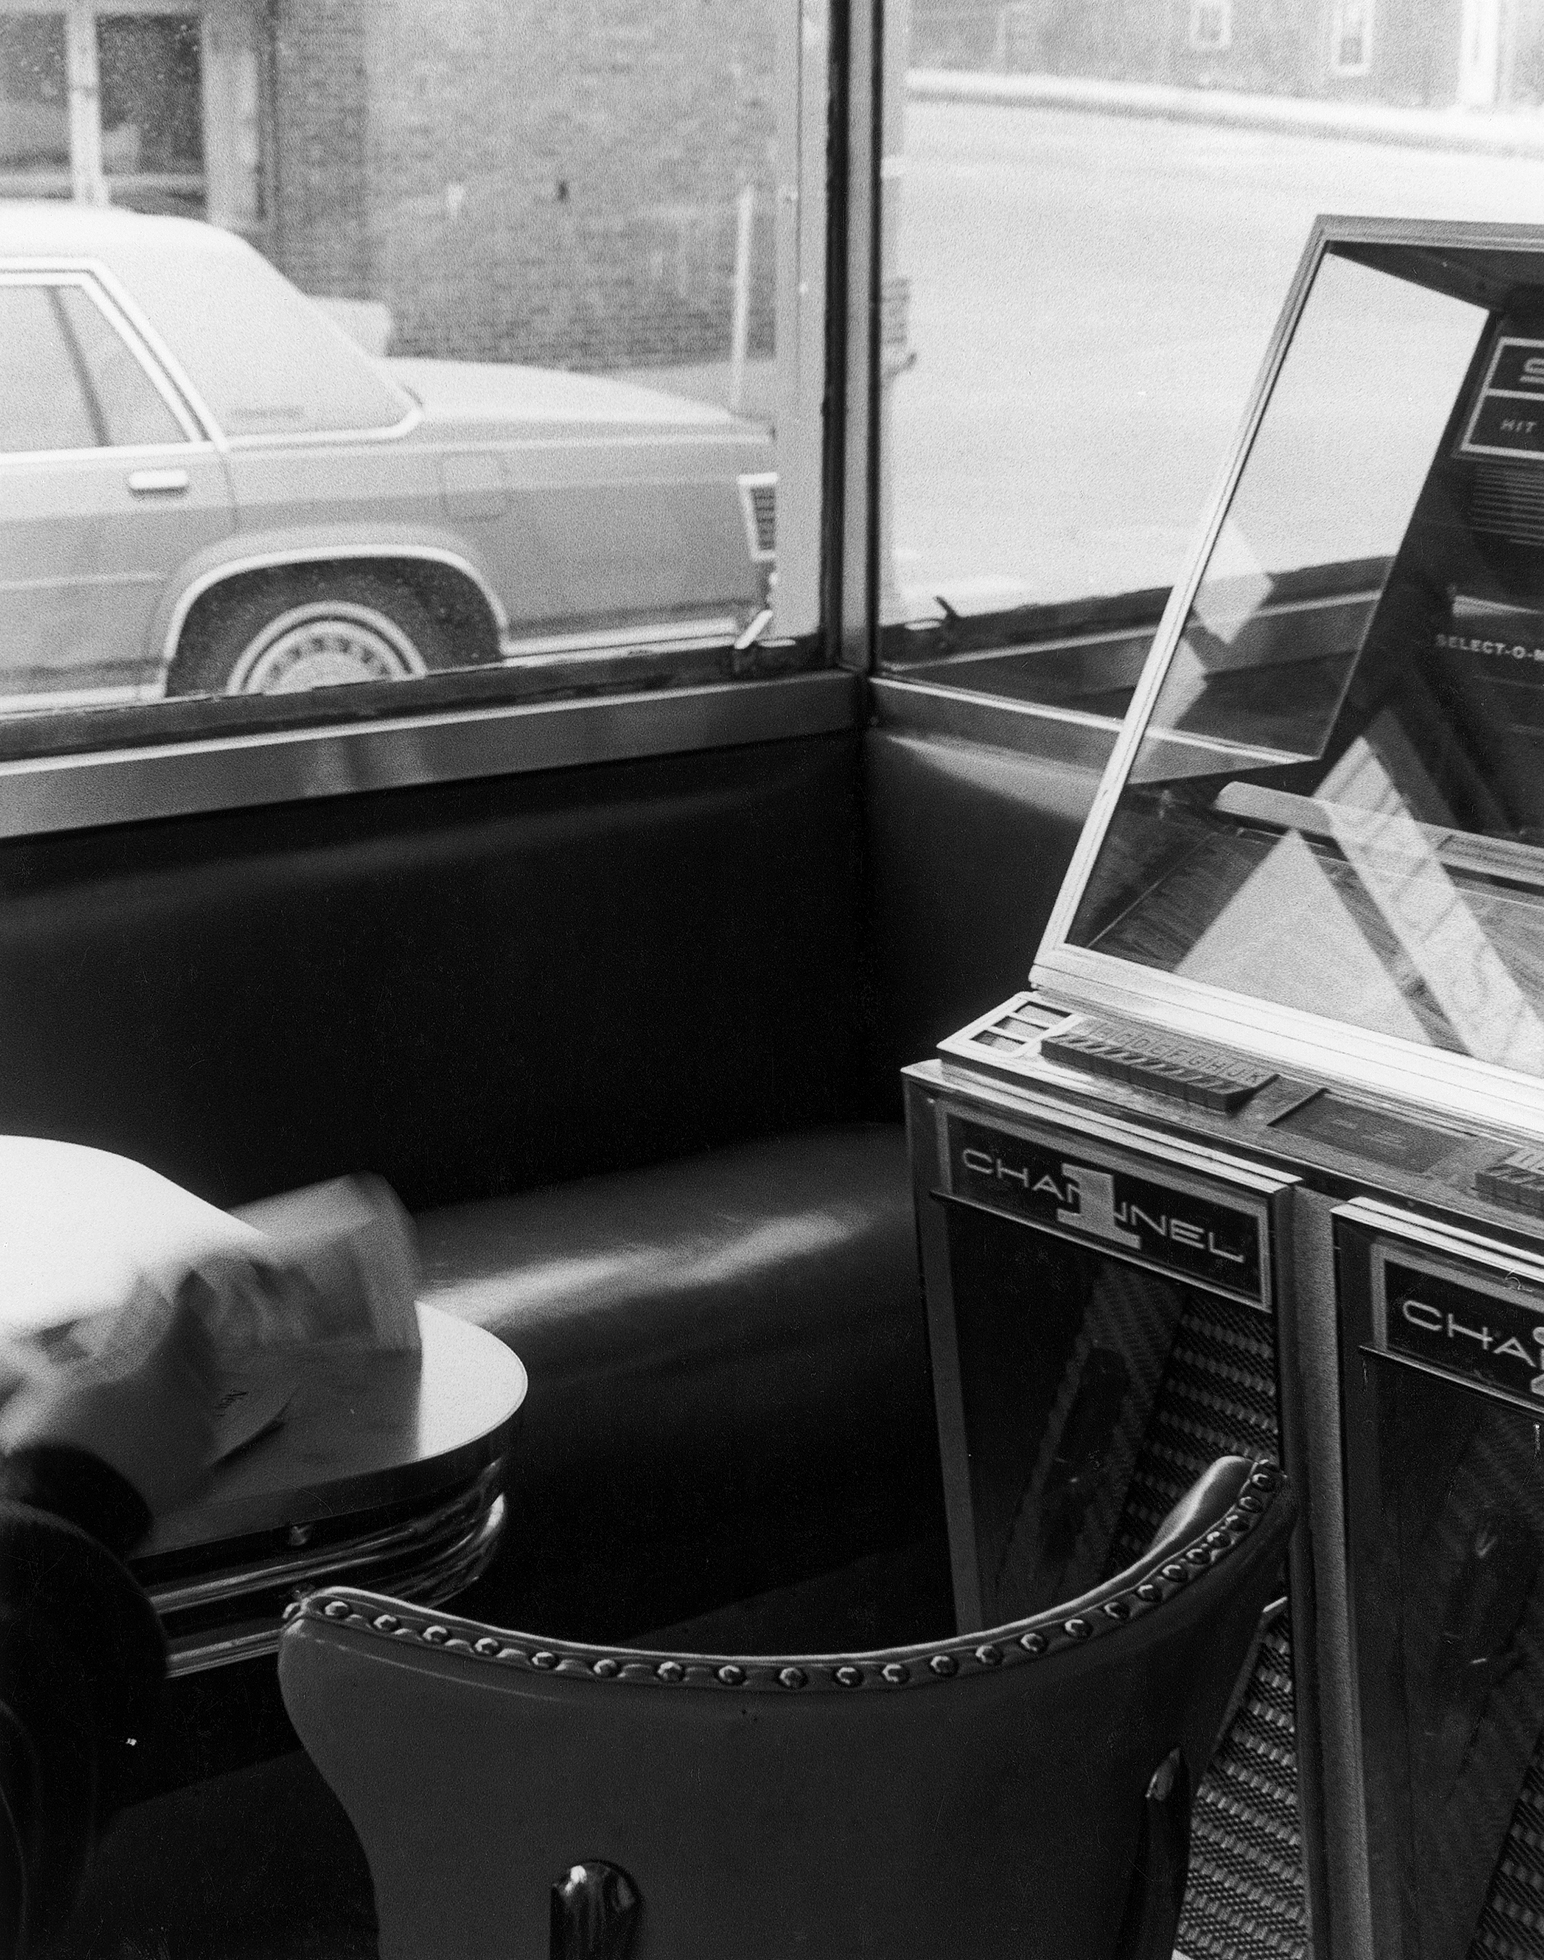 The arm of someone reading the newspaper at a table at a business with bench seating beneath the window and a jukebox. Through the window is a car and brick buildings.